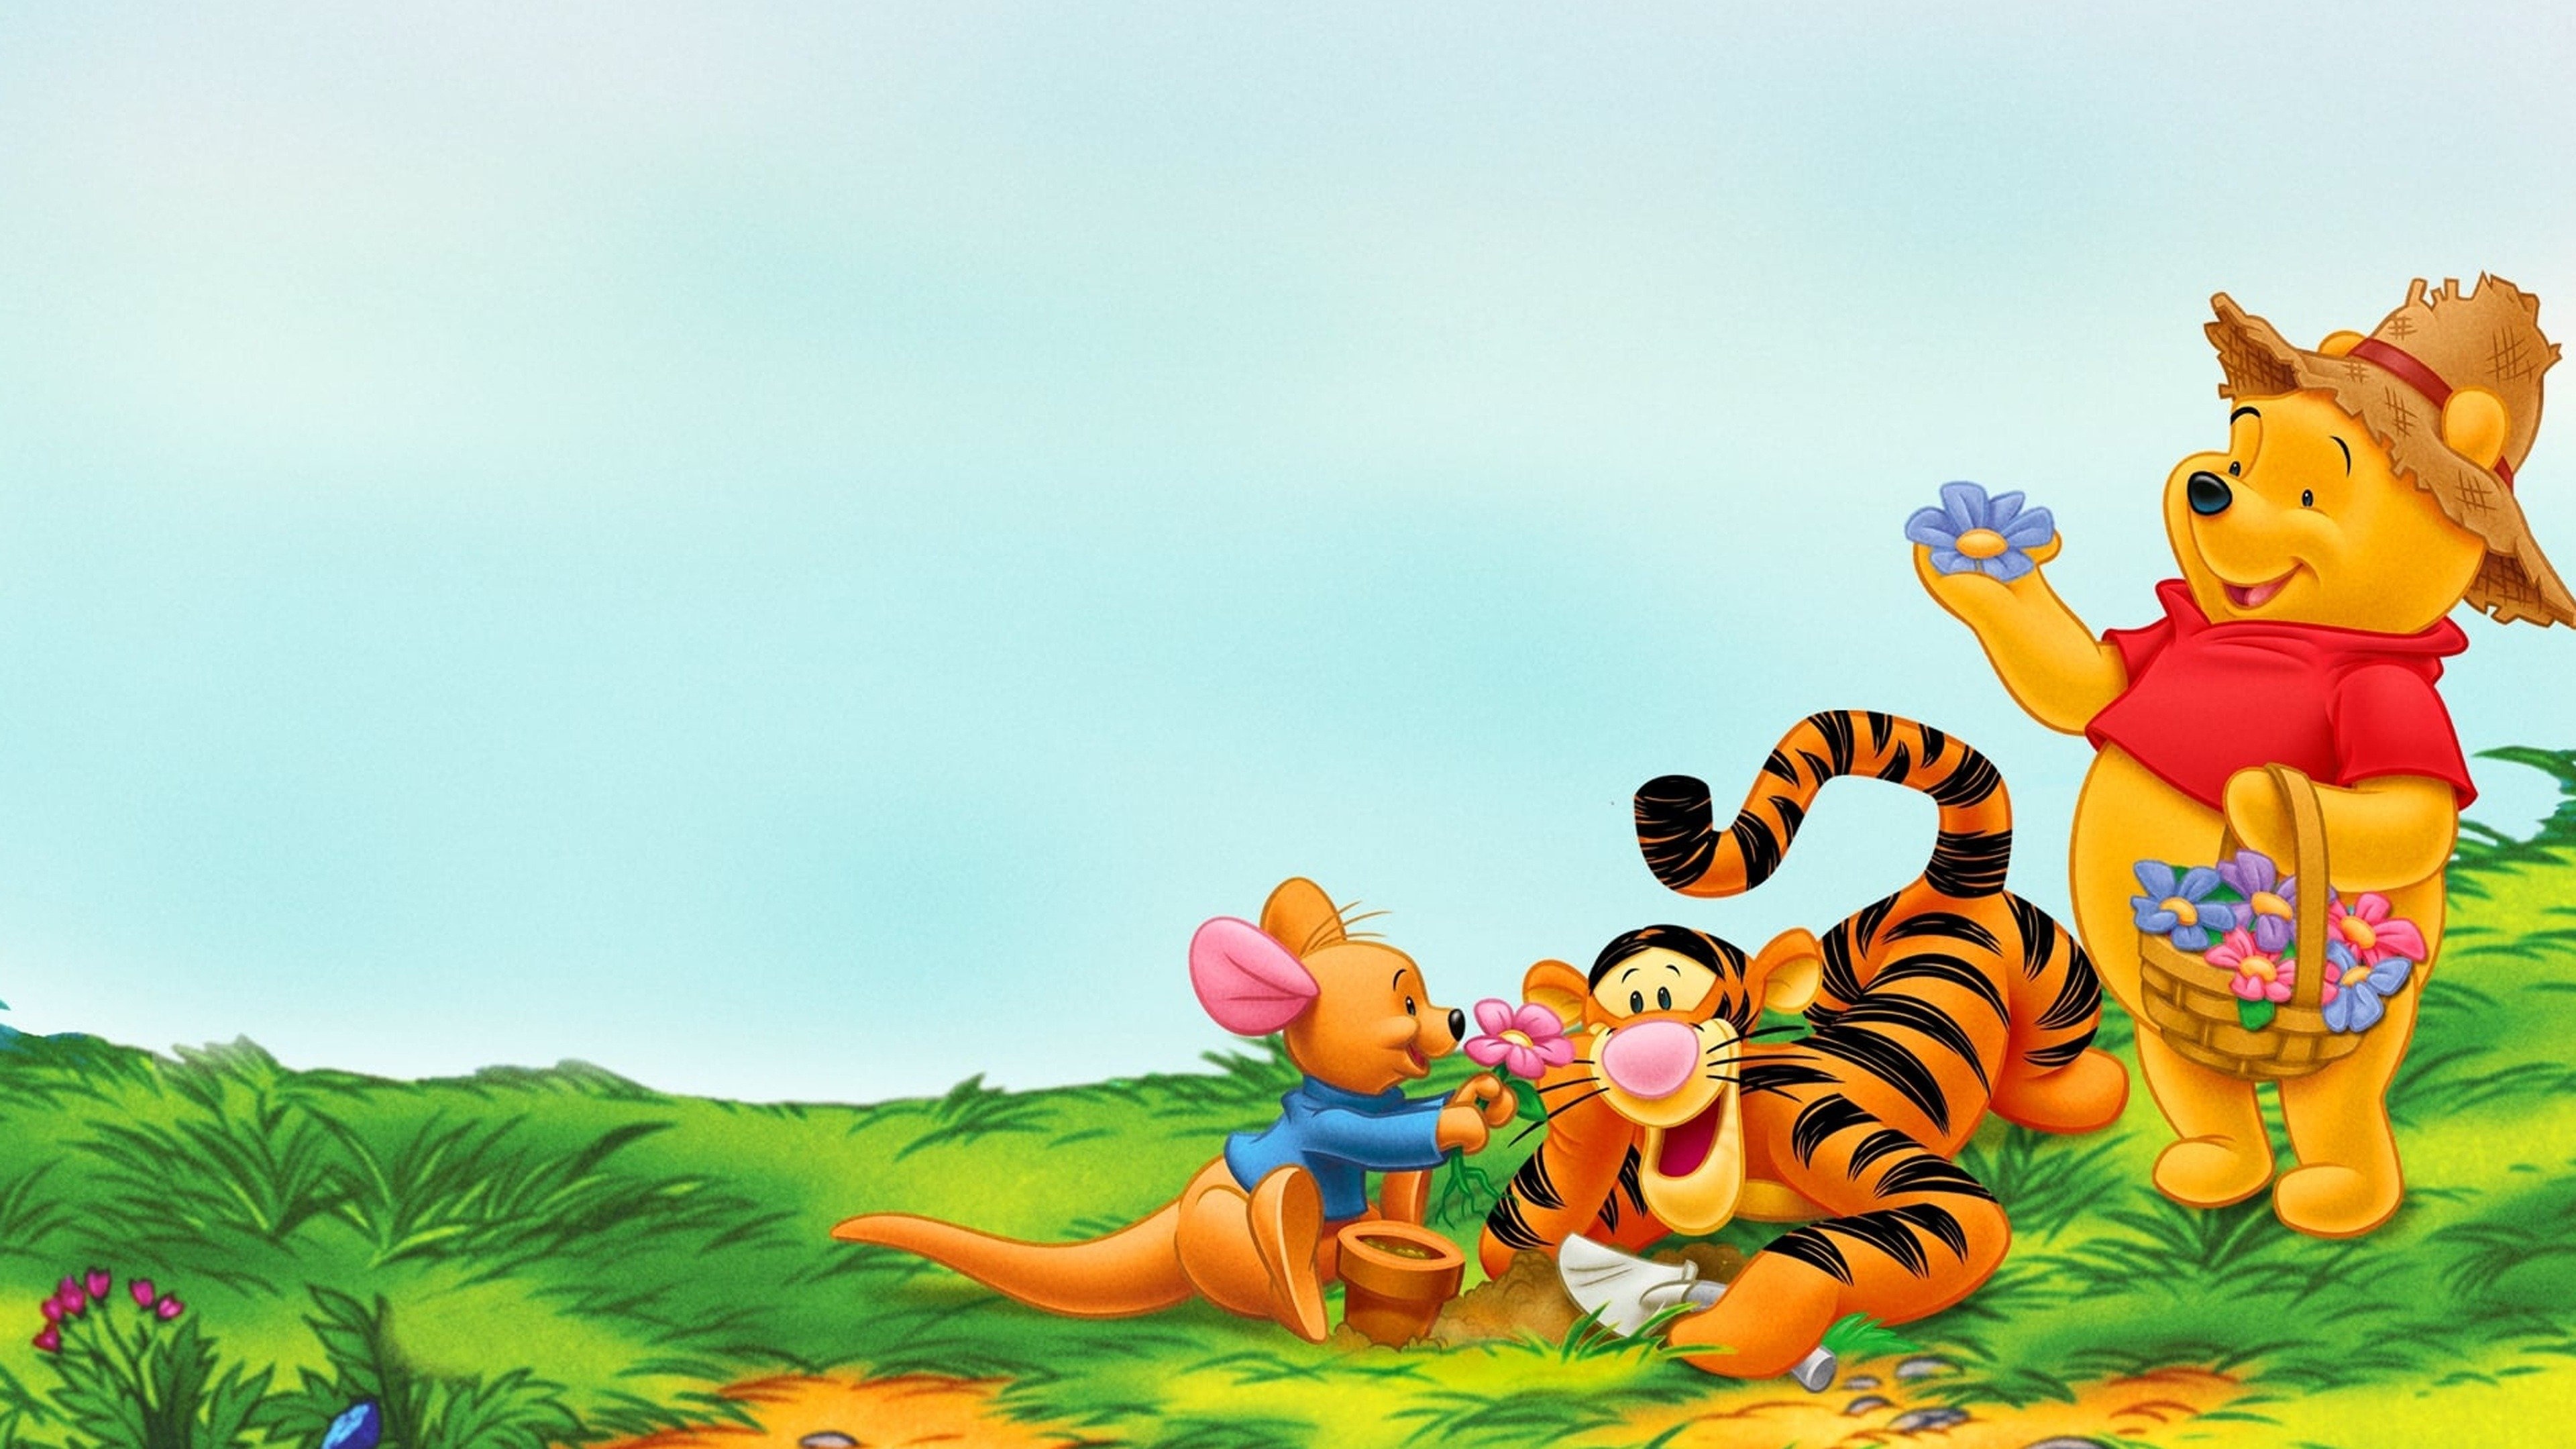 Winnie the Pooh Wallpapers (51+ images inside)